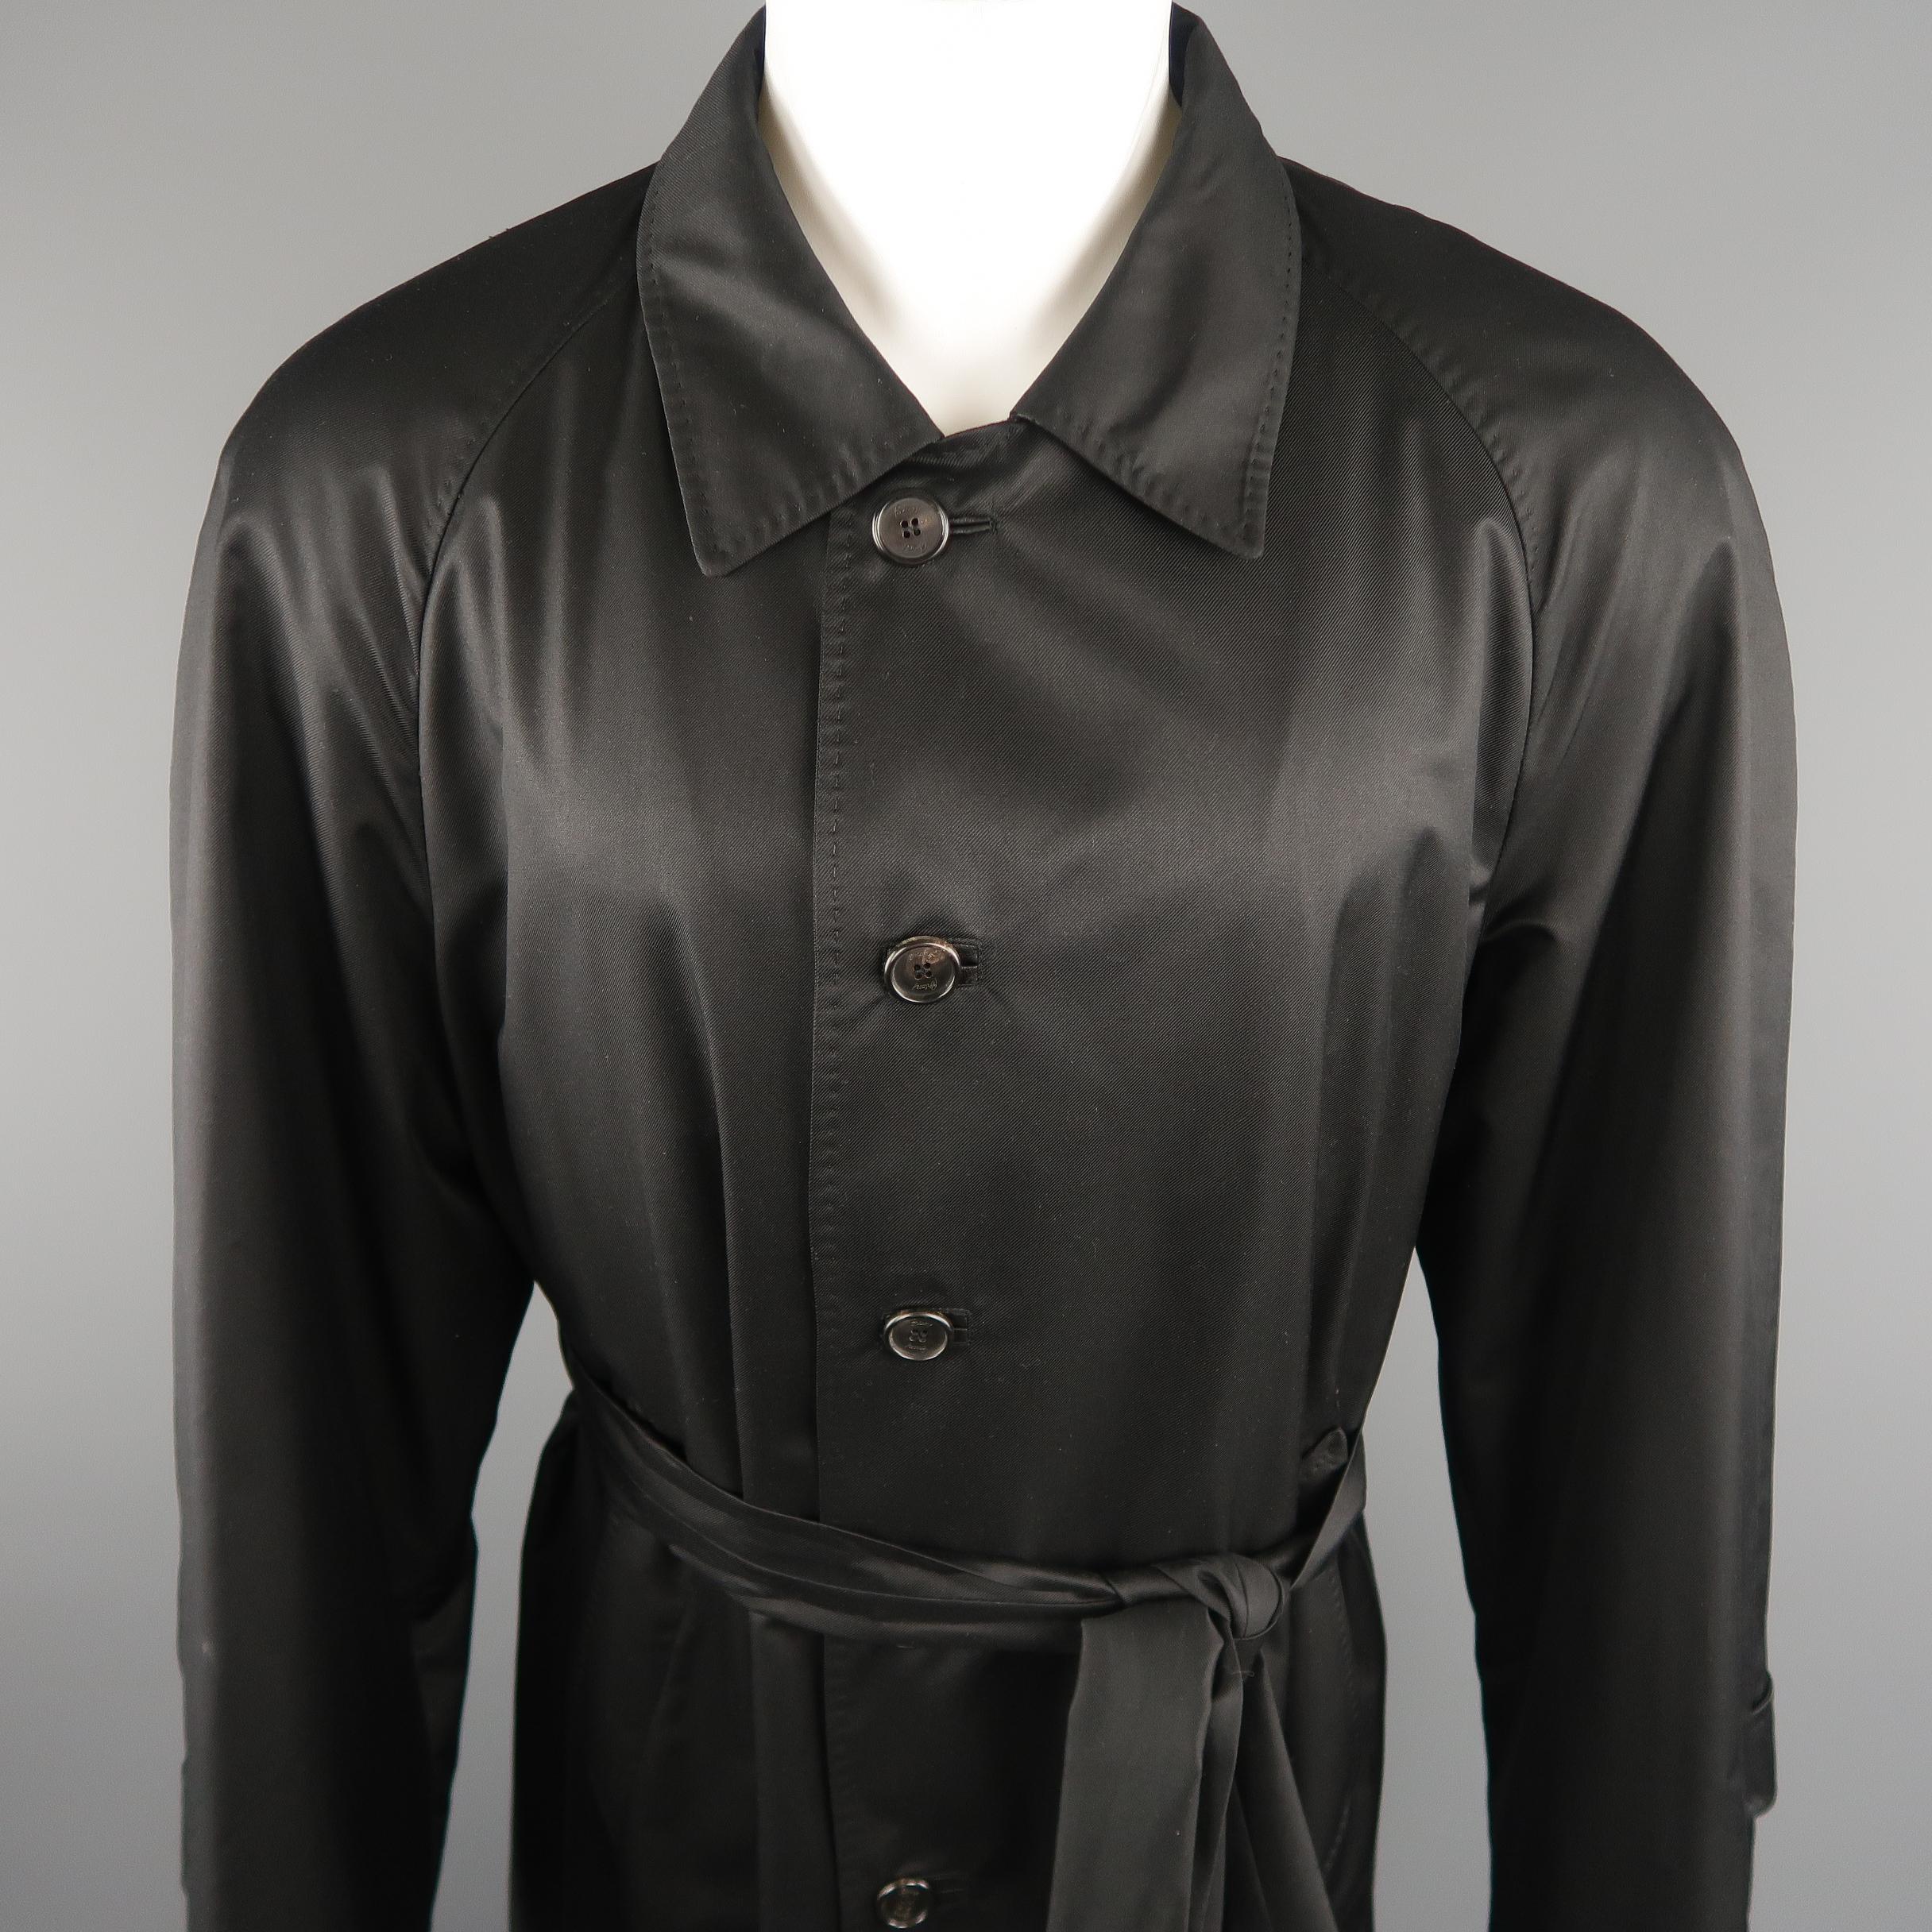 WILKES BASHFORD by BRIONI long trenchcoat comes in a black solid silk, with slit pockets, leather buttonholes and belt. Made in Italy.
 
Excellent Pre-Owned Condition.
Marked: 48 IT
 
Measurements:
 
Shoulder: 17.5 in.
Chest: 48 in.
Sleeve: 27